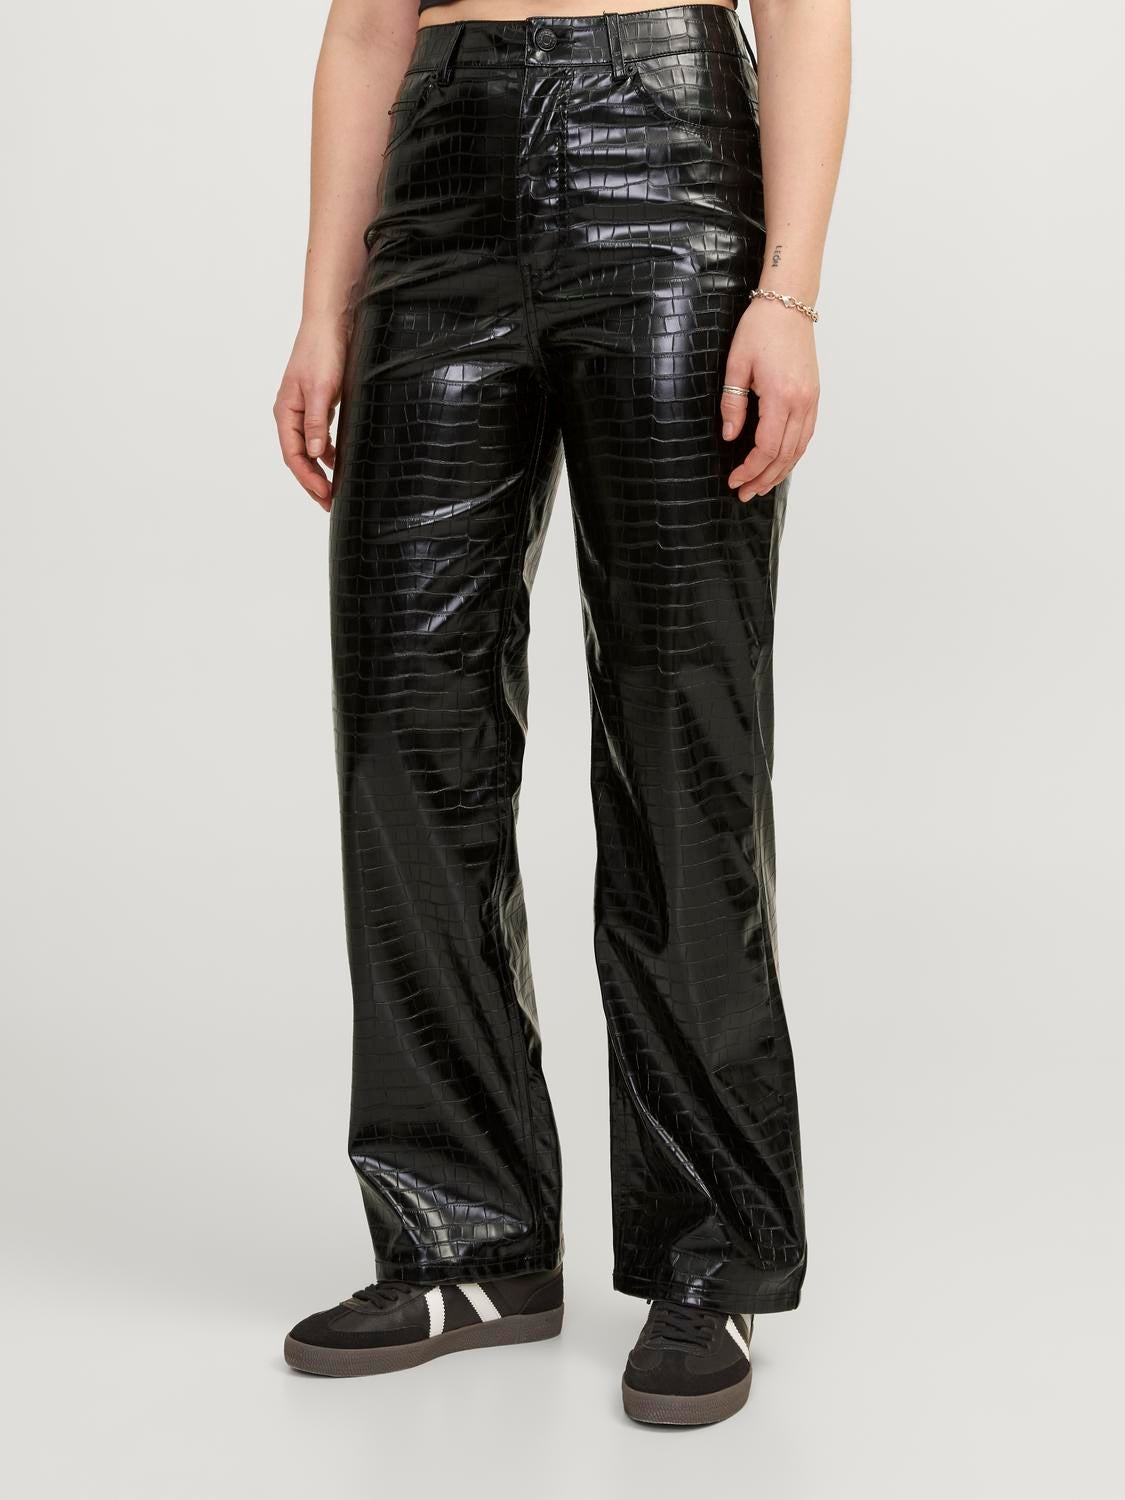 Croc Faux Leather High Waisted Pants | Nasty Gal